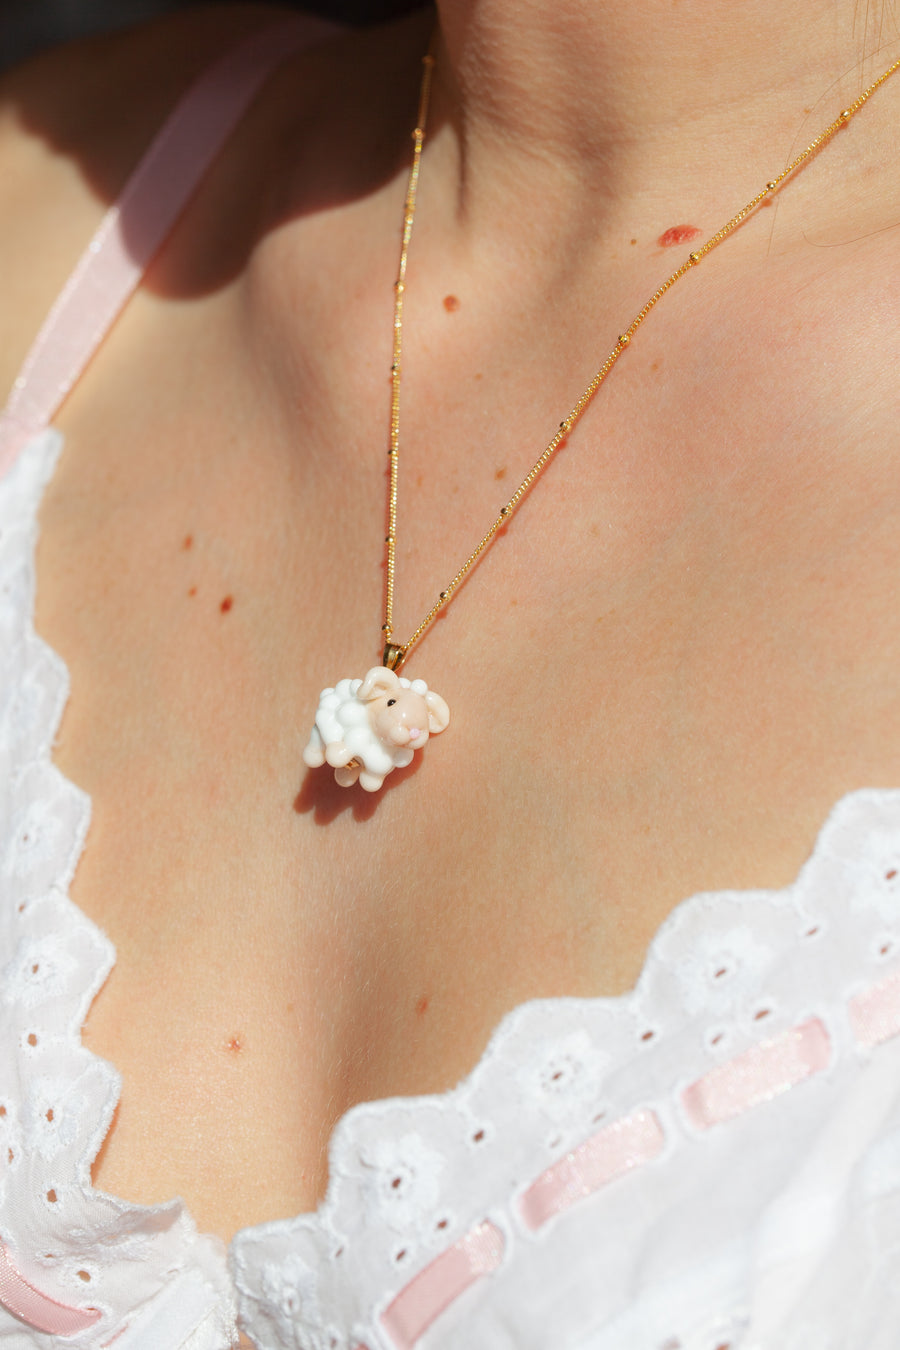 Fluffy Sheep Charm Necklace